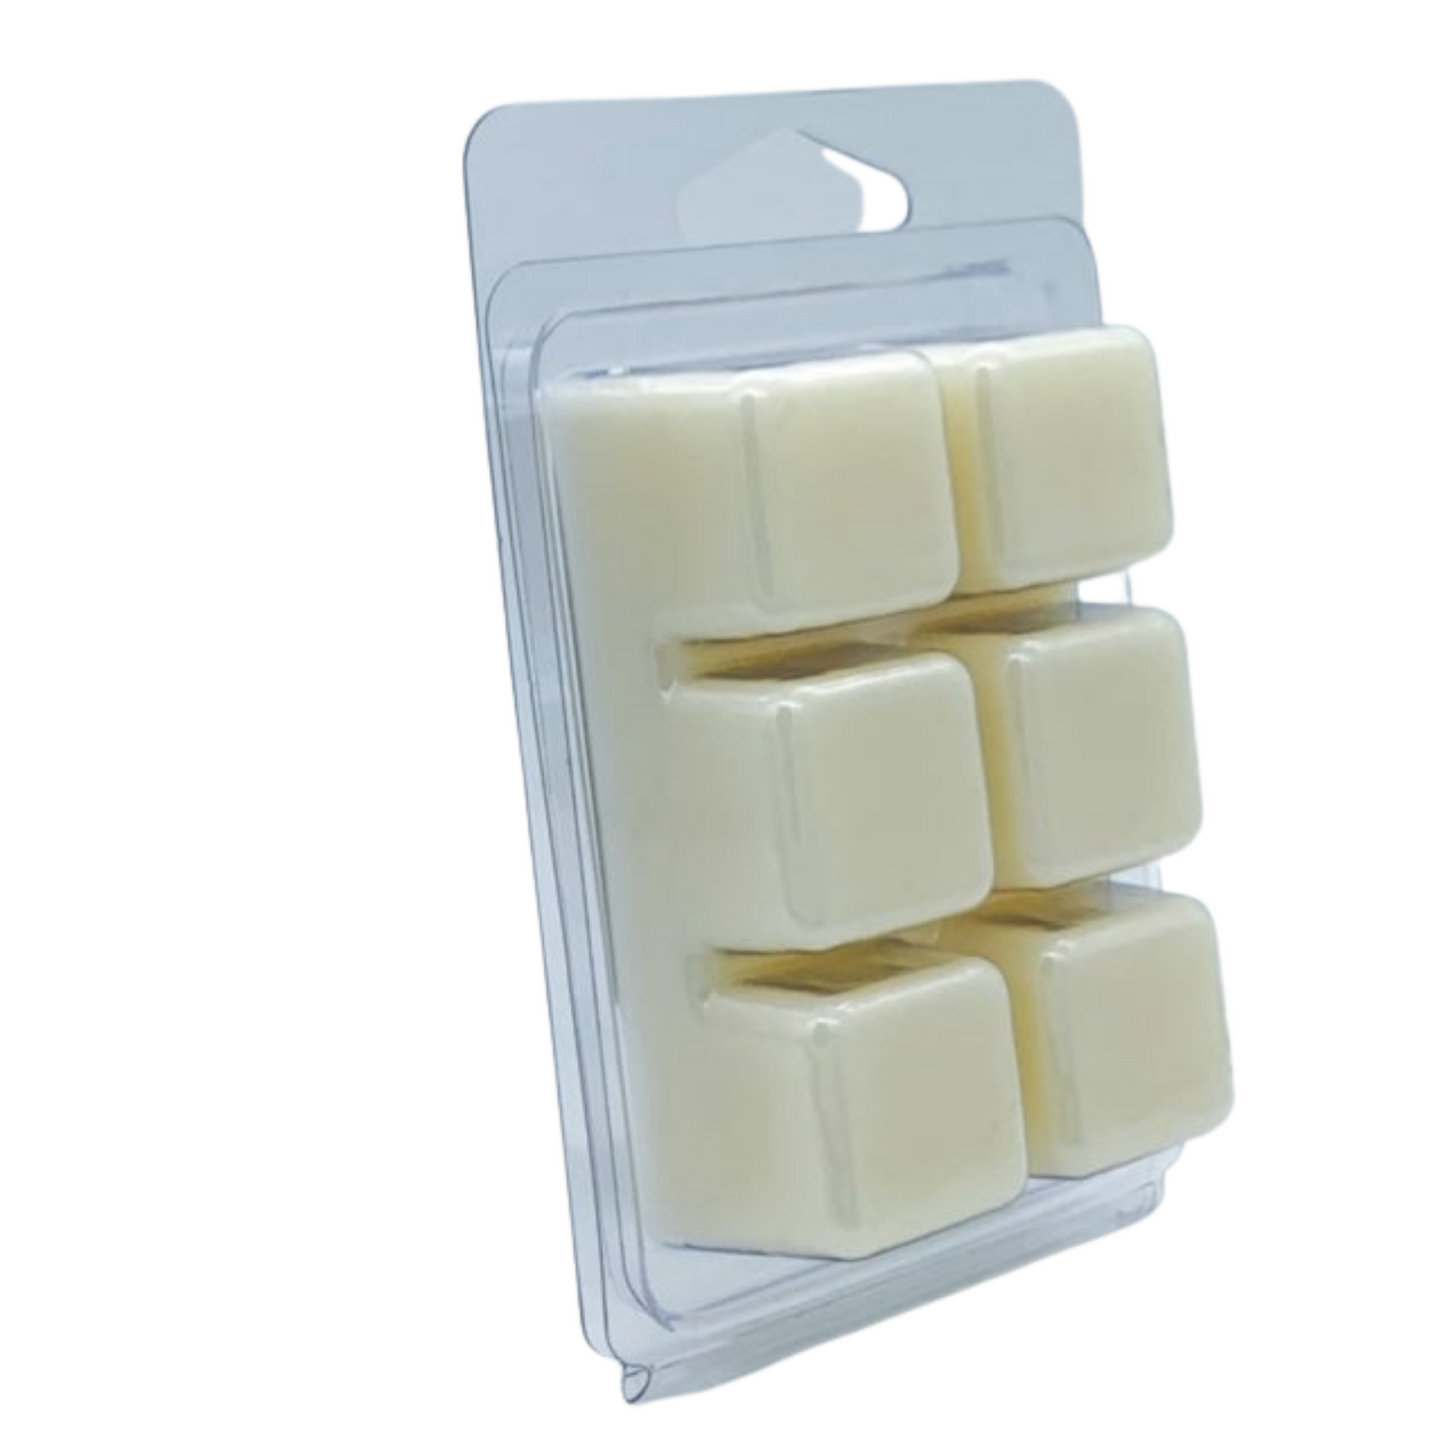 GERANIUM BAMBOO | Scented Soy Wax Melts